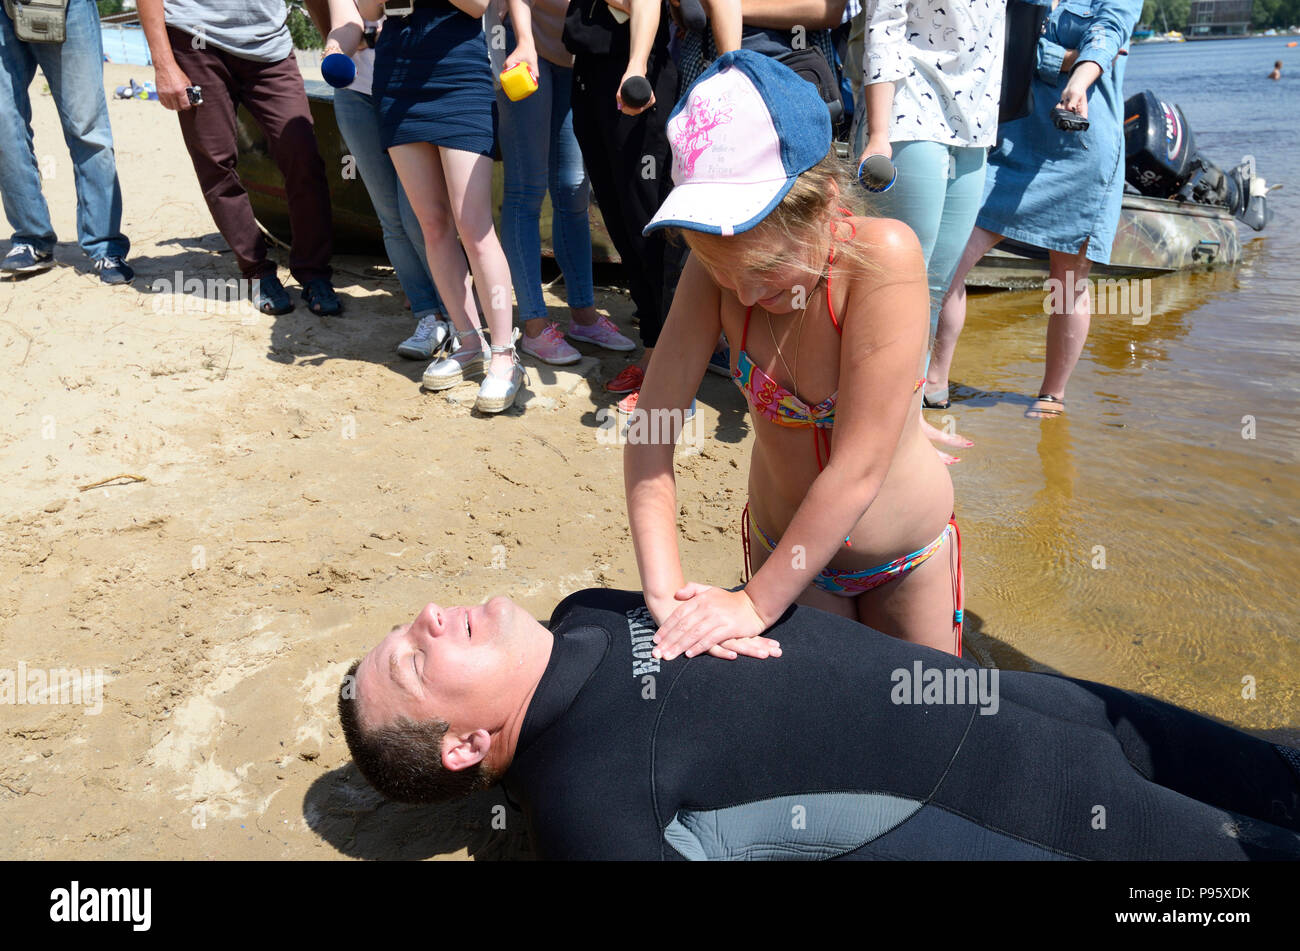 Lifeguards demonstrate right ways of artificial respiration for drowning. Stock Photo